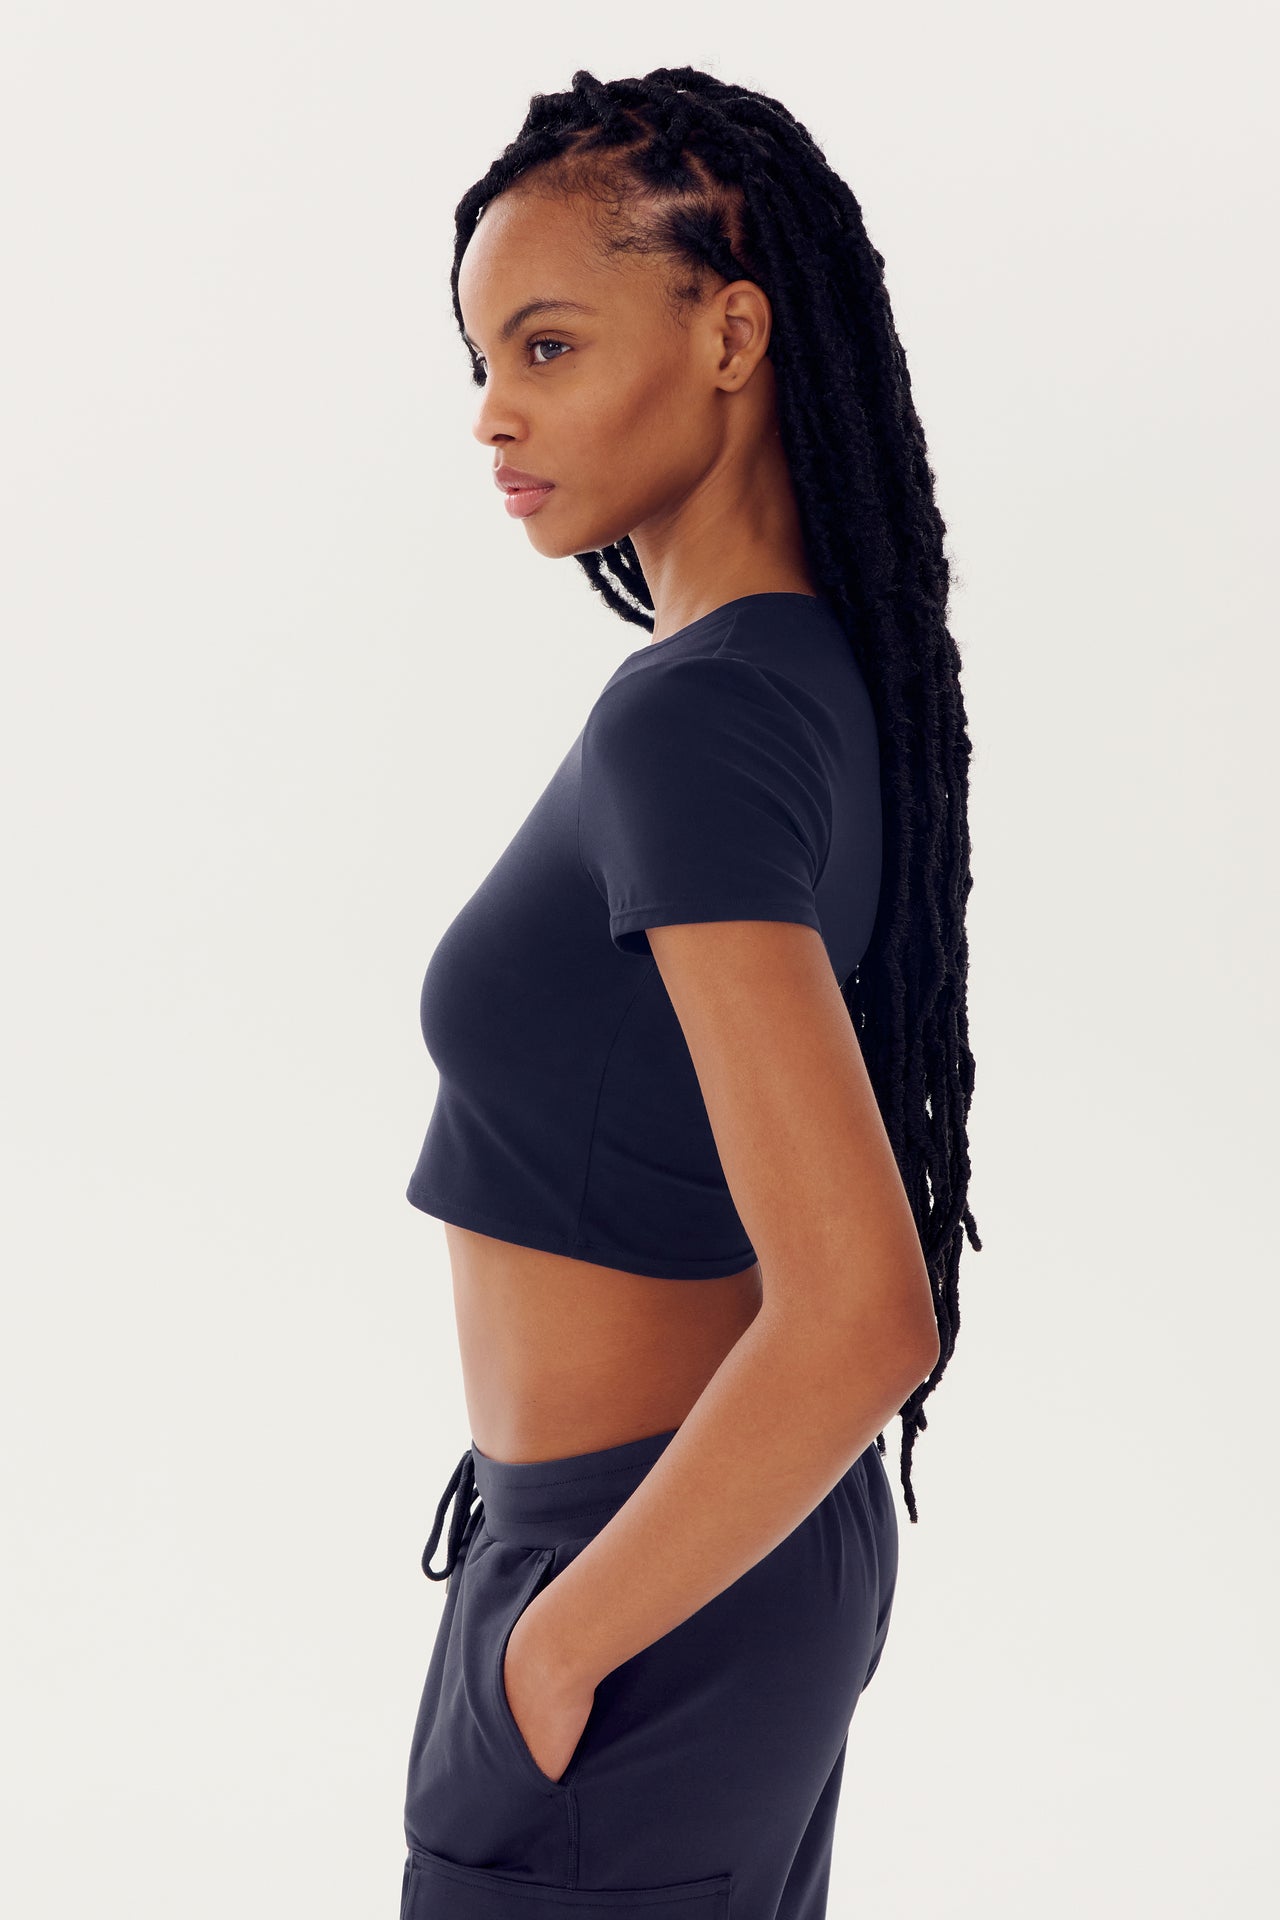 Side profile of a woman with braided hair wearing an SPLITS59 Airweight S/S Crop - Indigo top and high-waisted pants.